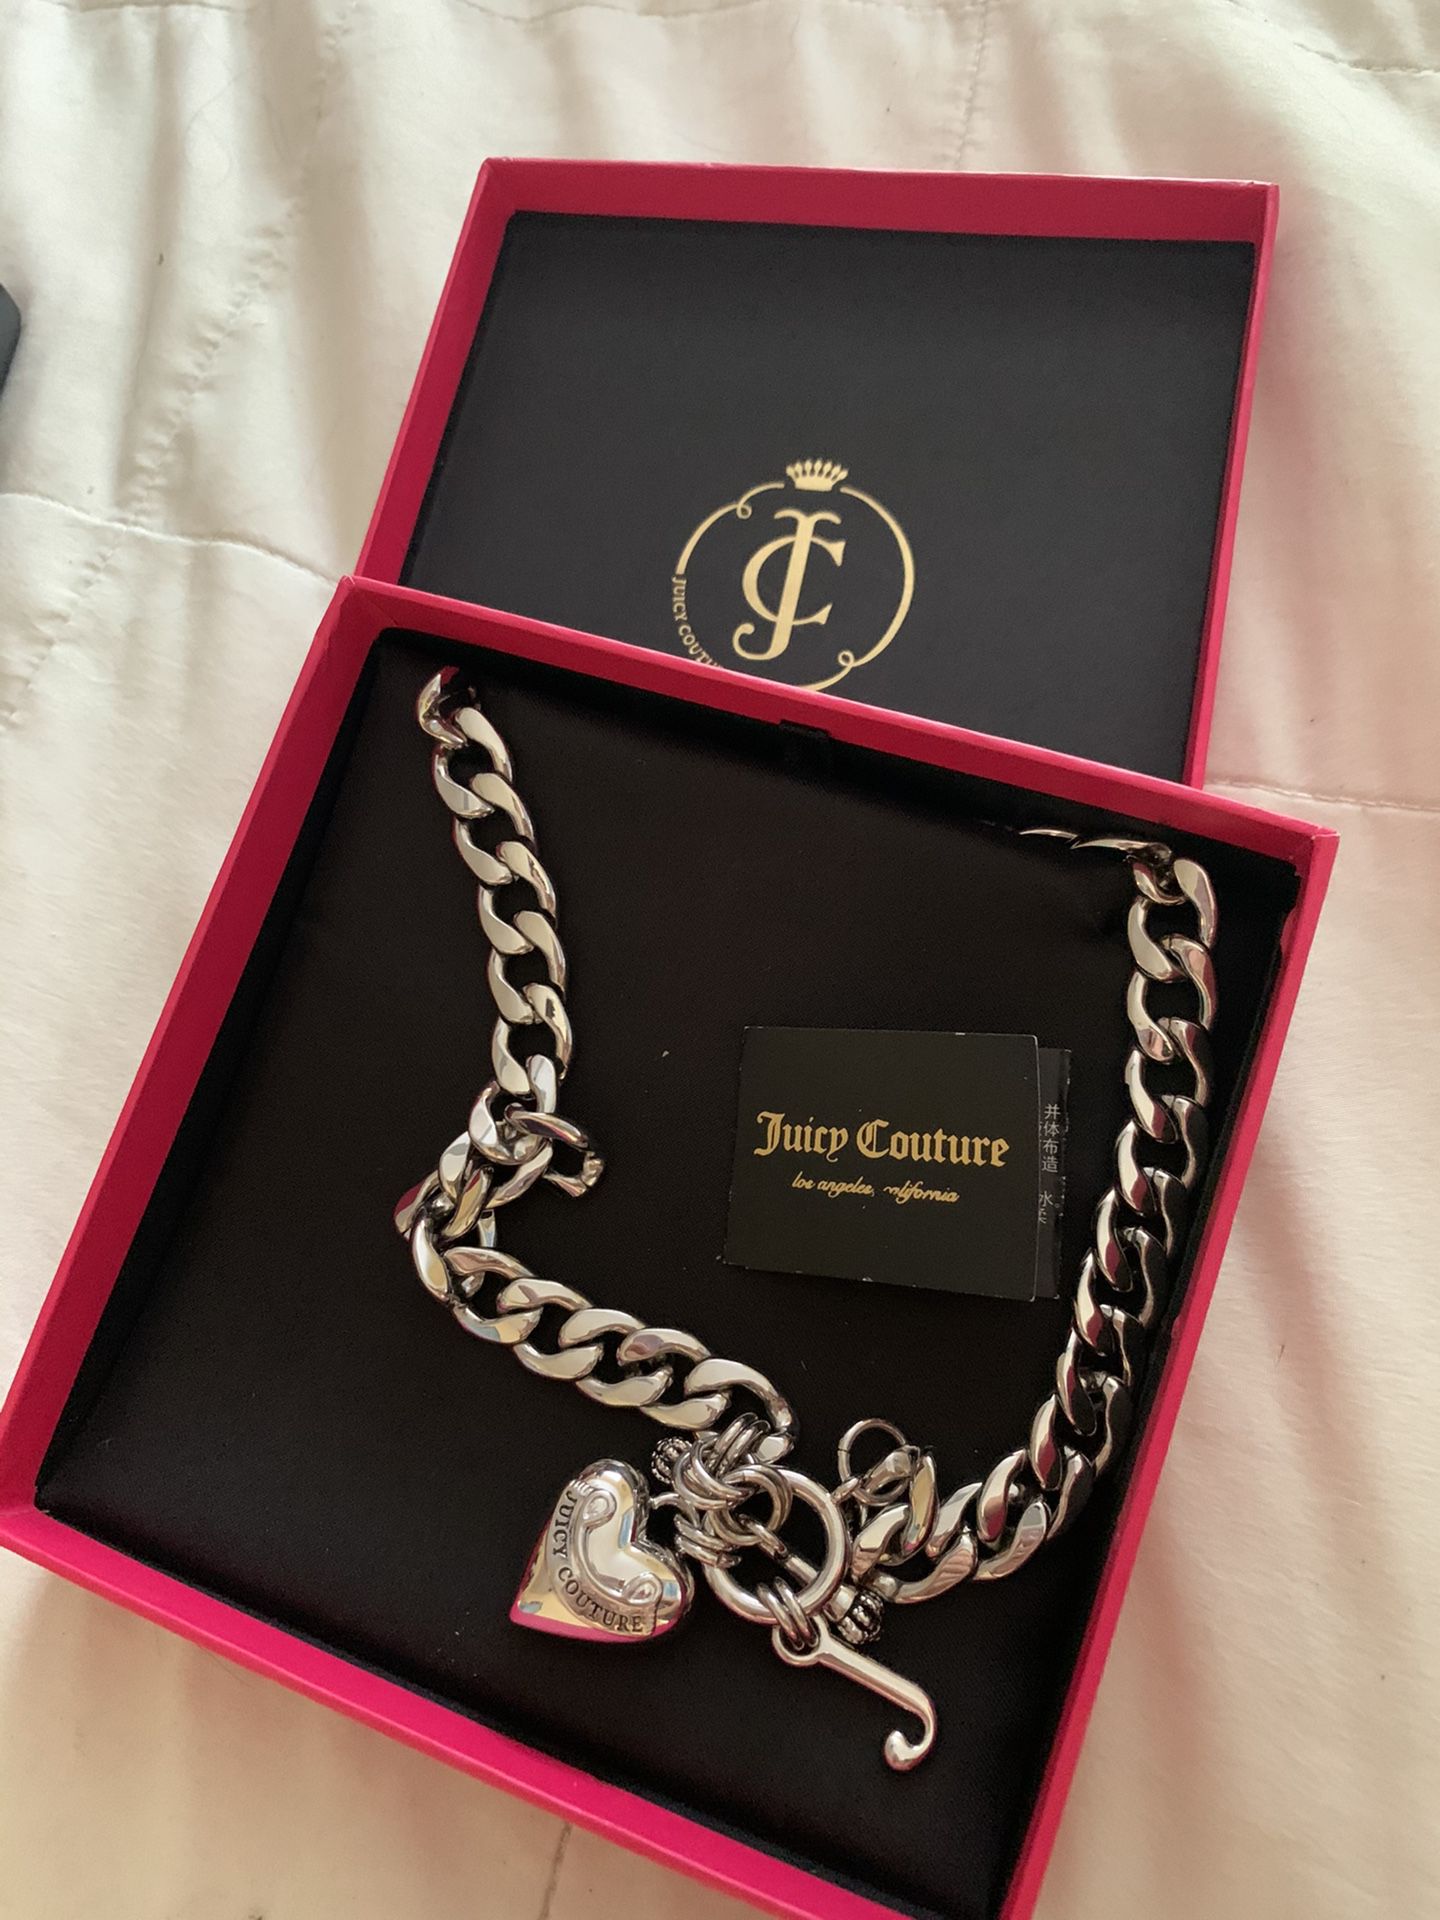 JUICY COUTURE NECKLACE IN BOX for Sale in Orlando, FL - OfferUp